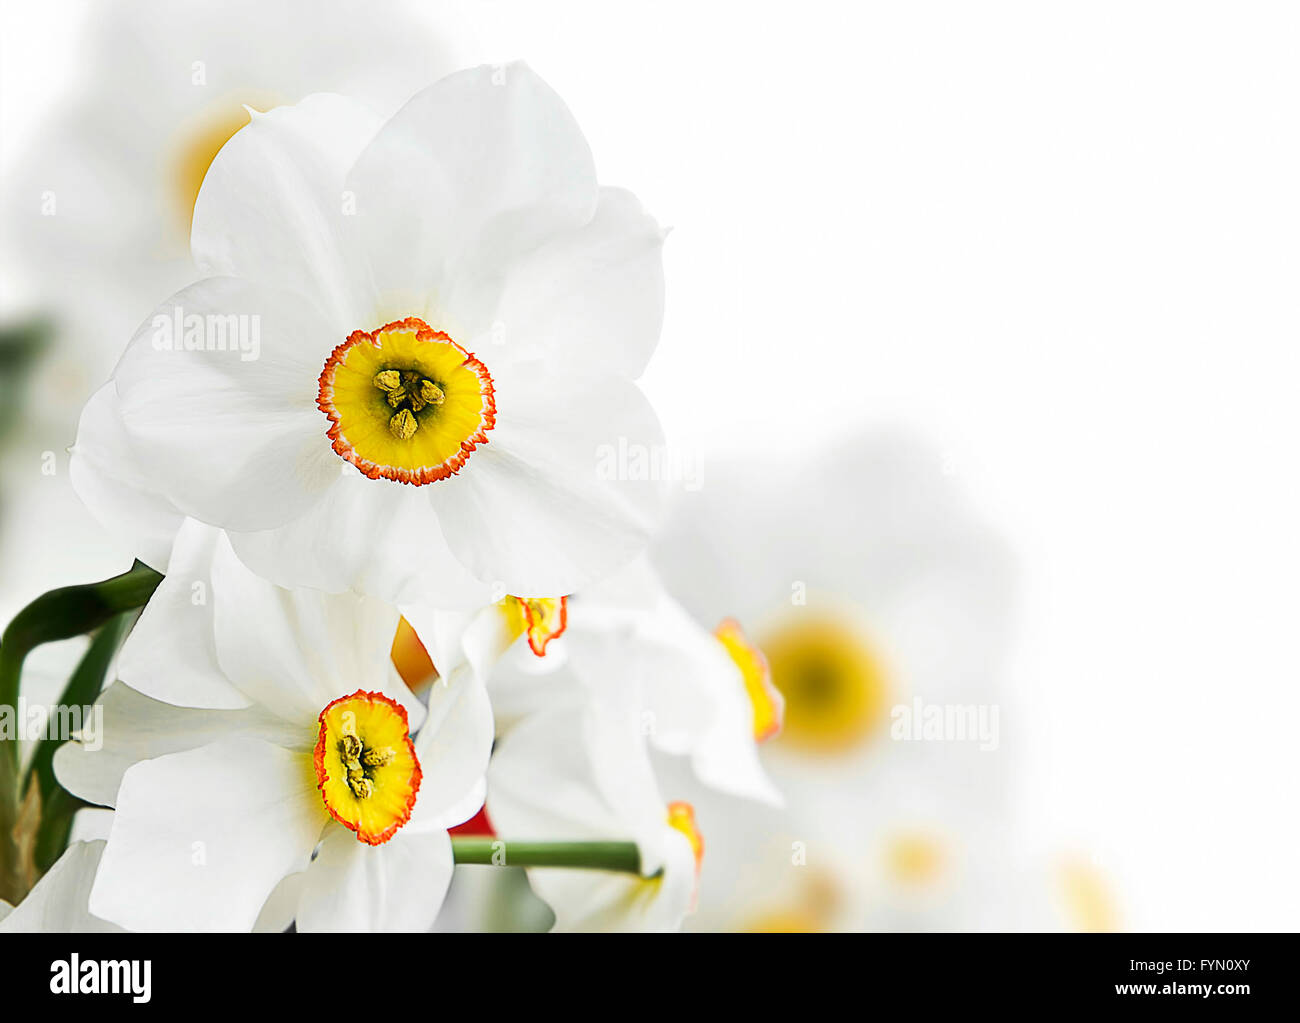 White daffodils flowers on white background Stock Photo